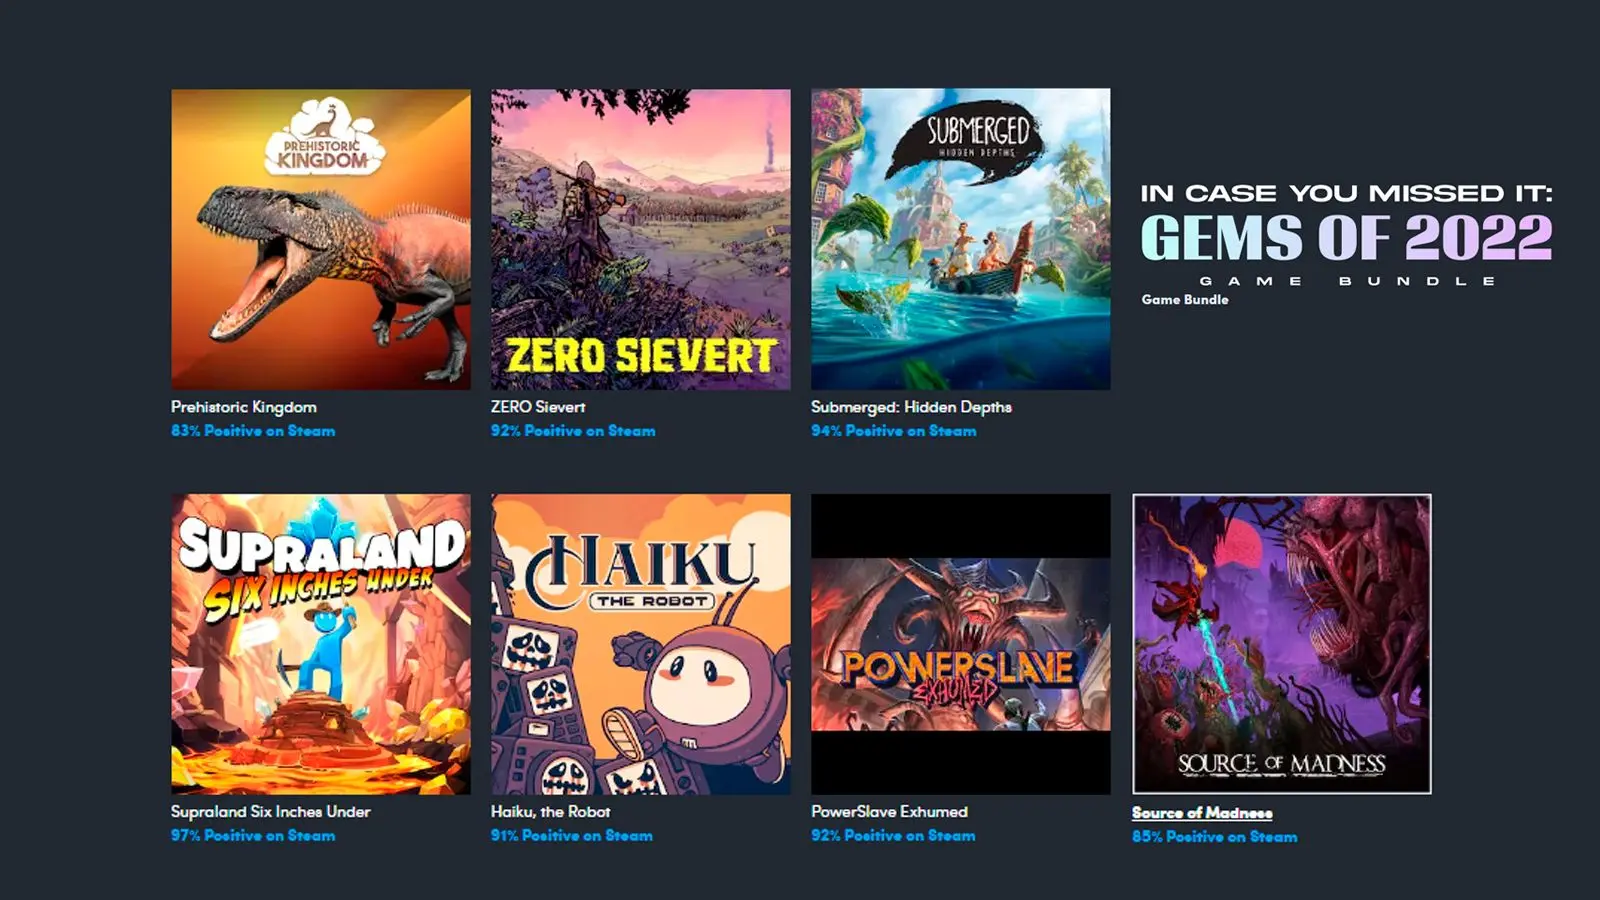 Humble Bundle's New Bundle Showcases Some Fantastic Games From 2022